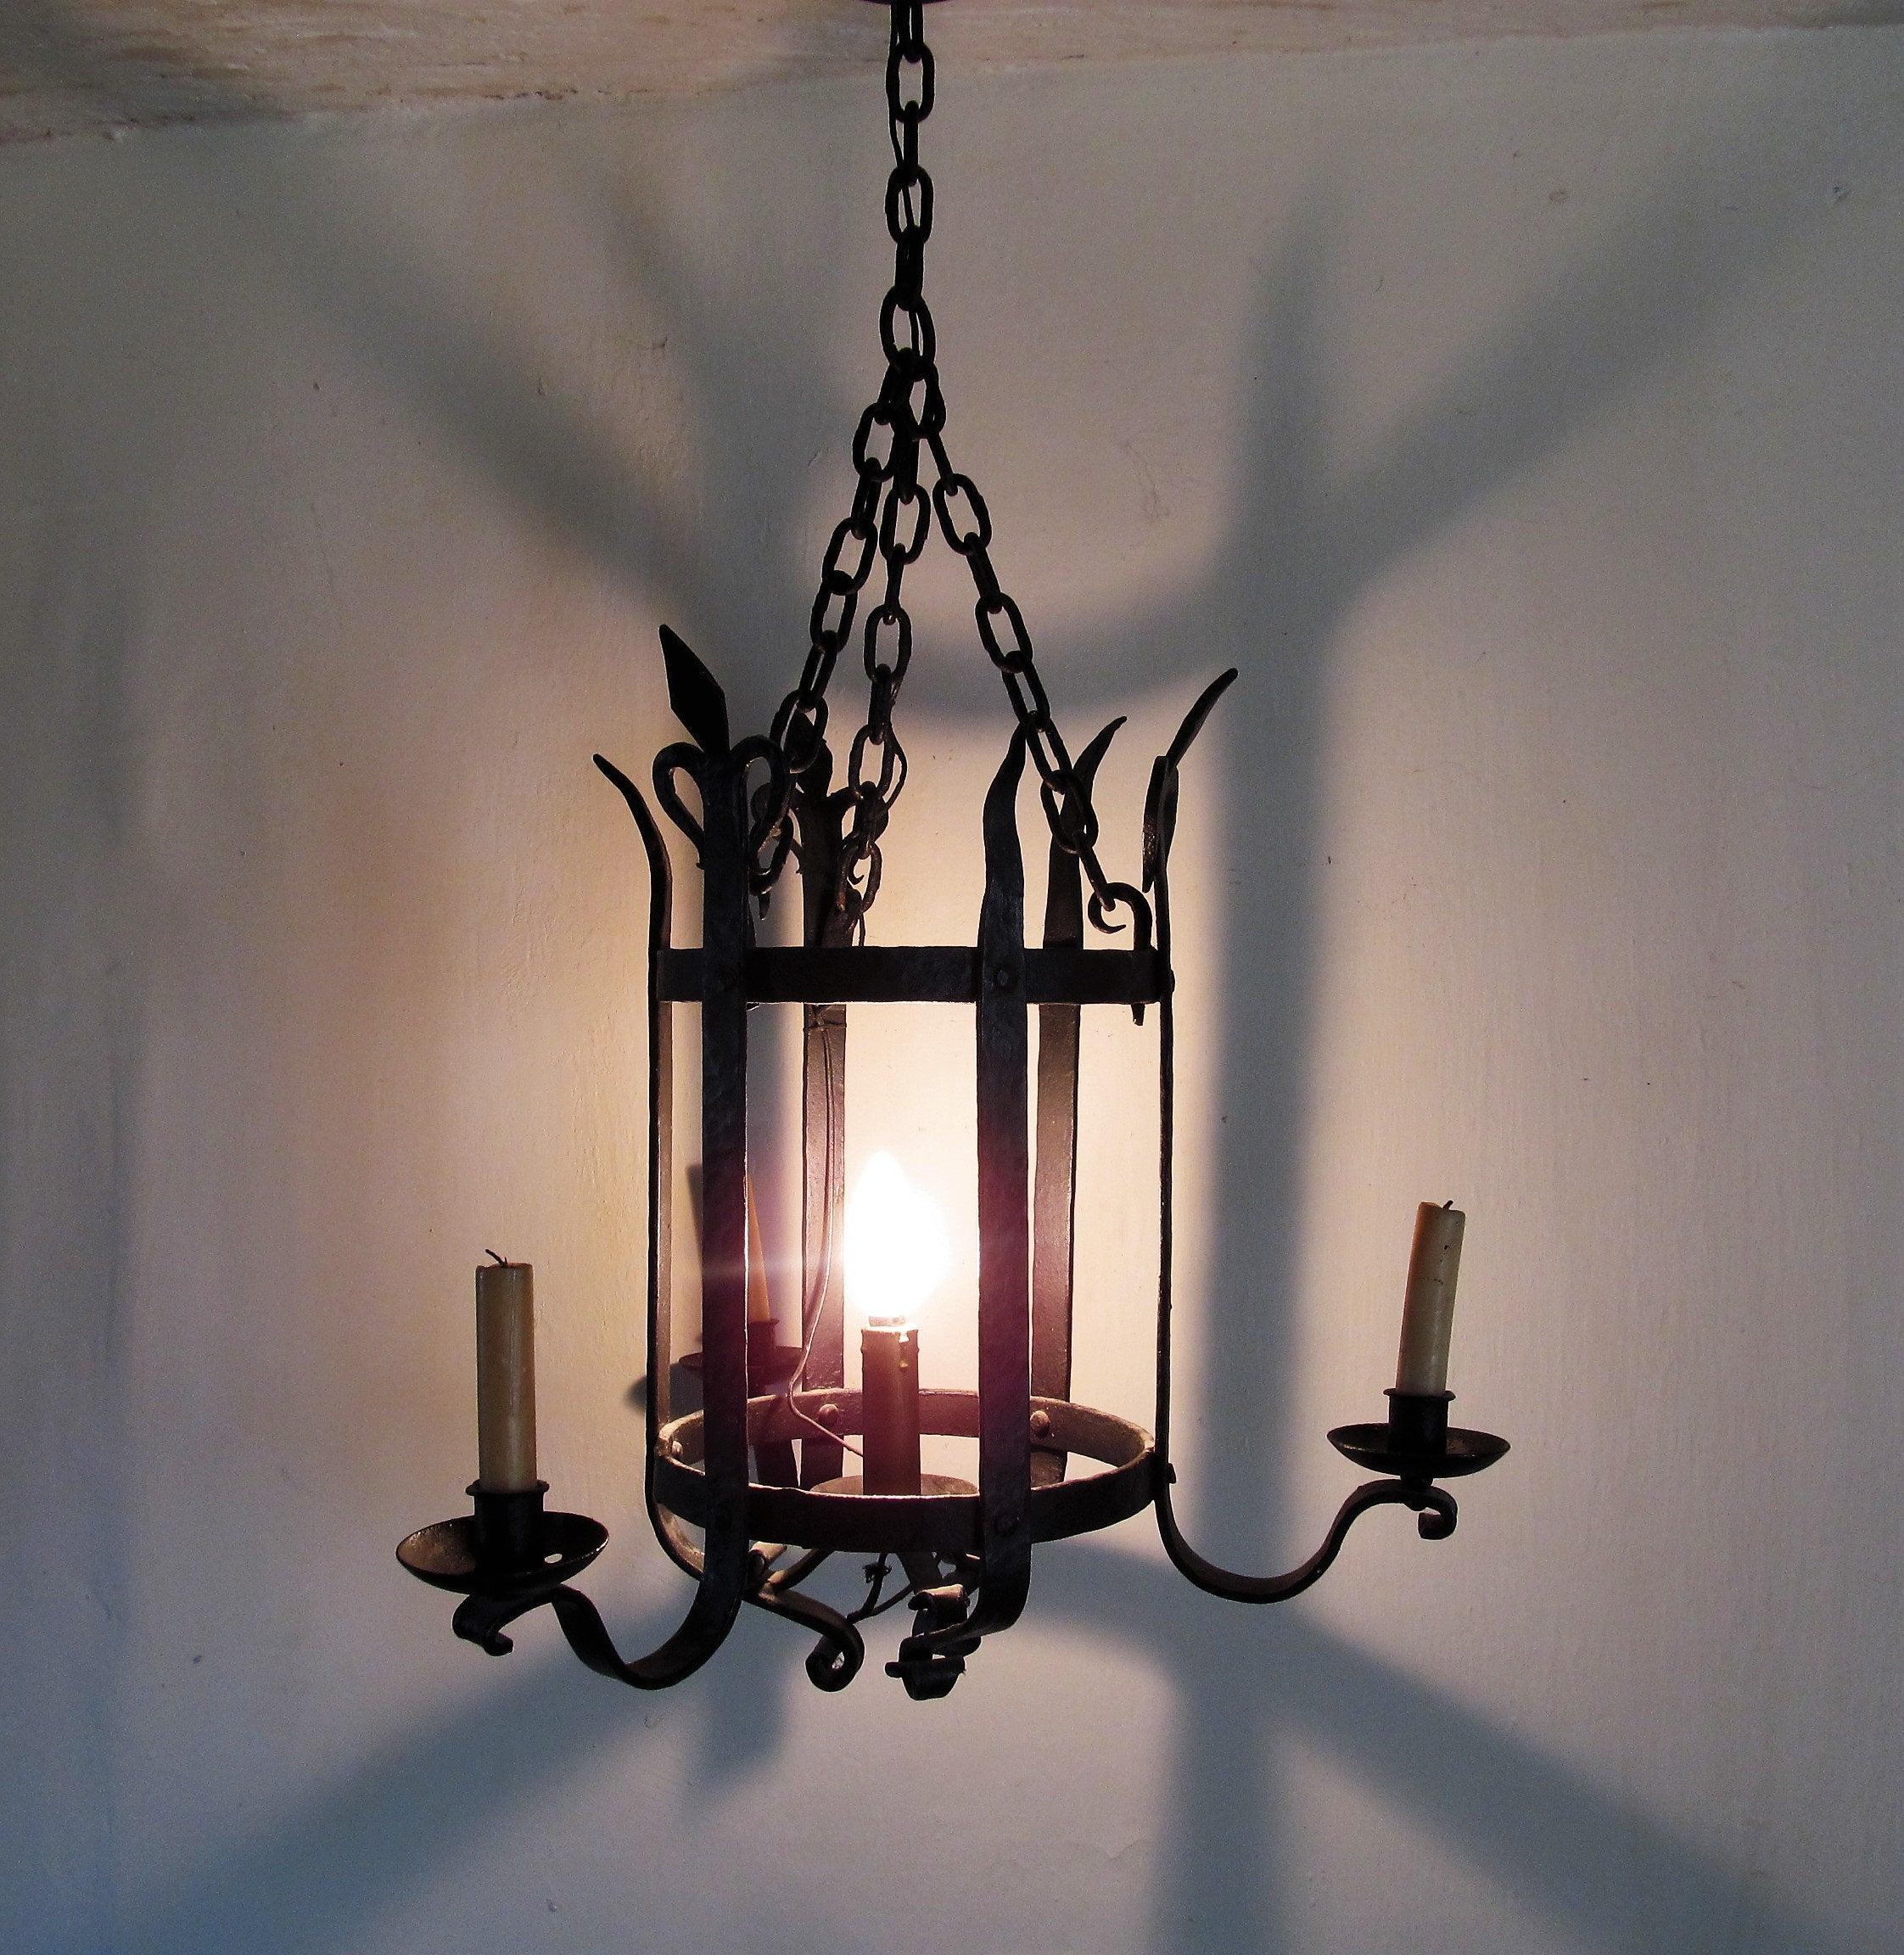 French Iron Steel Meval Rustic, Rustic Round Iron Chandelier